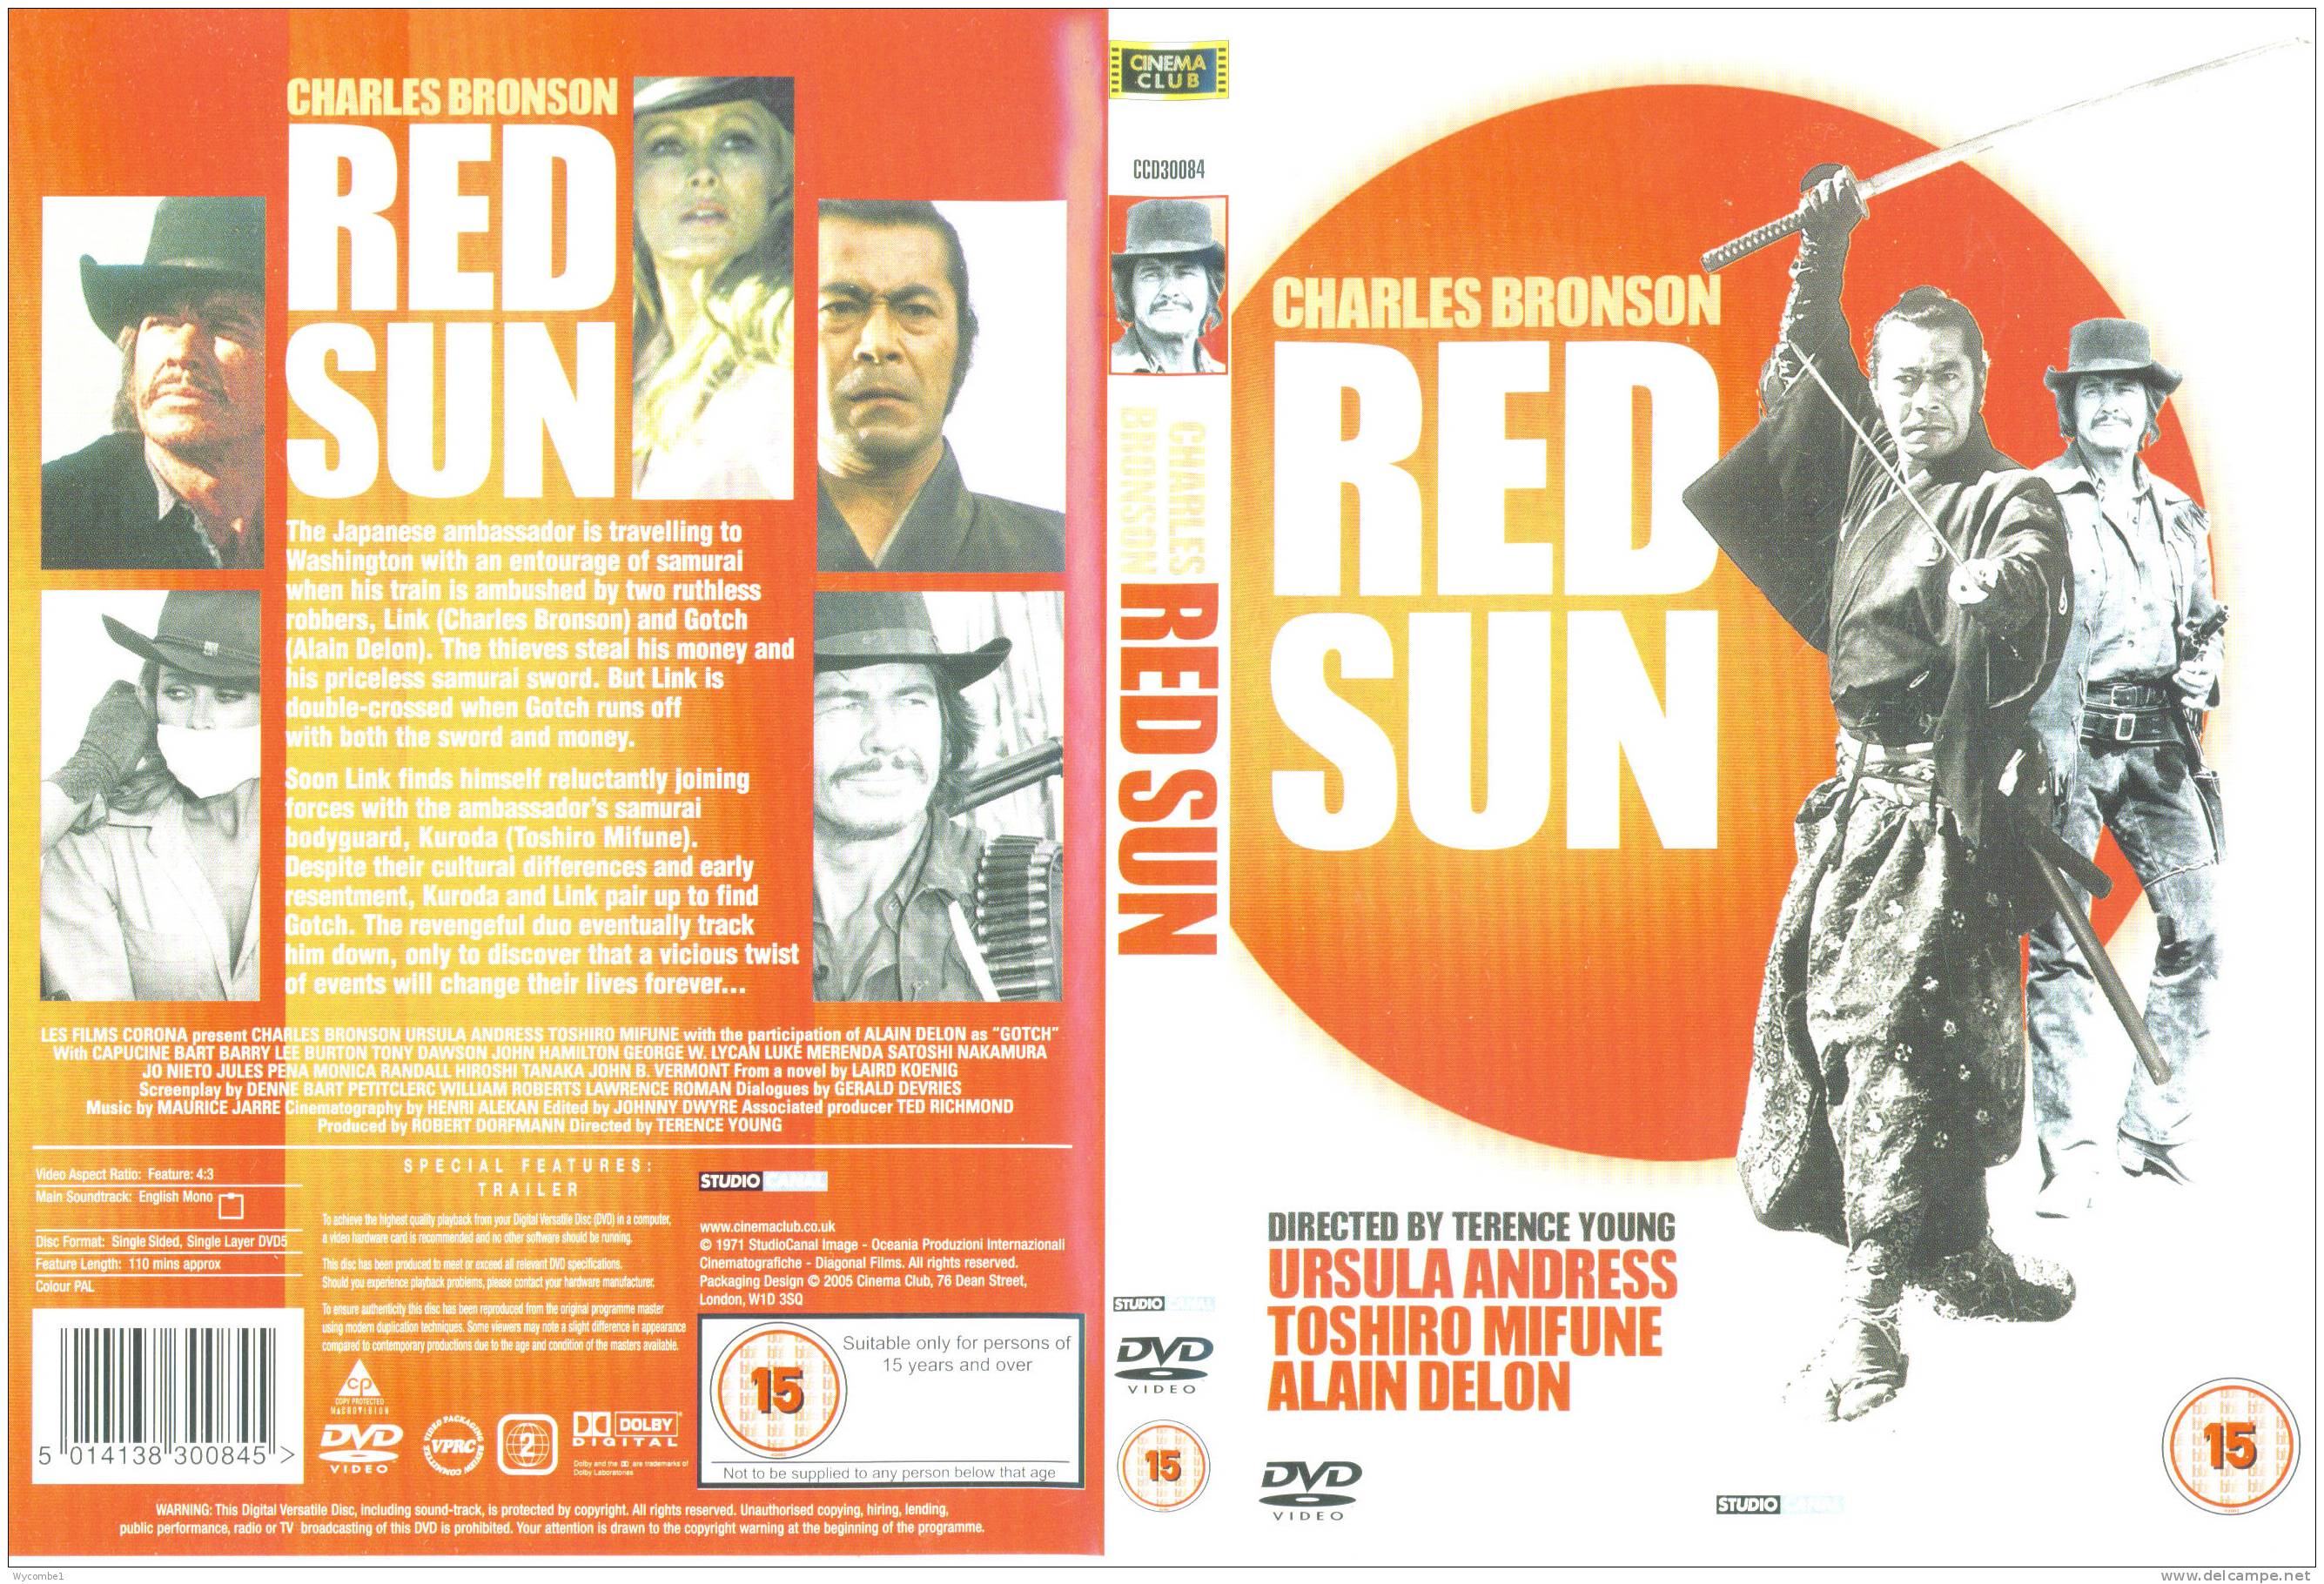 RED SUN - Charles Bronson (Details As Scan) - Western / Cowboy